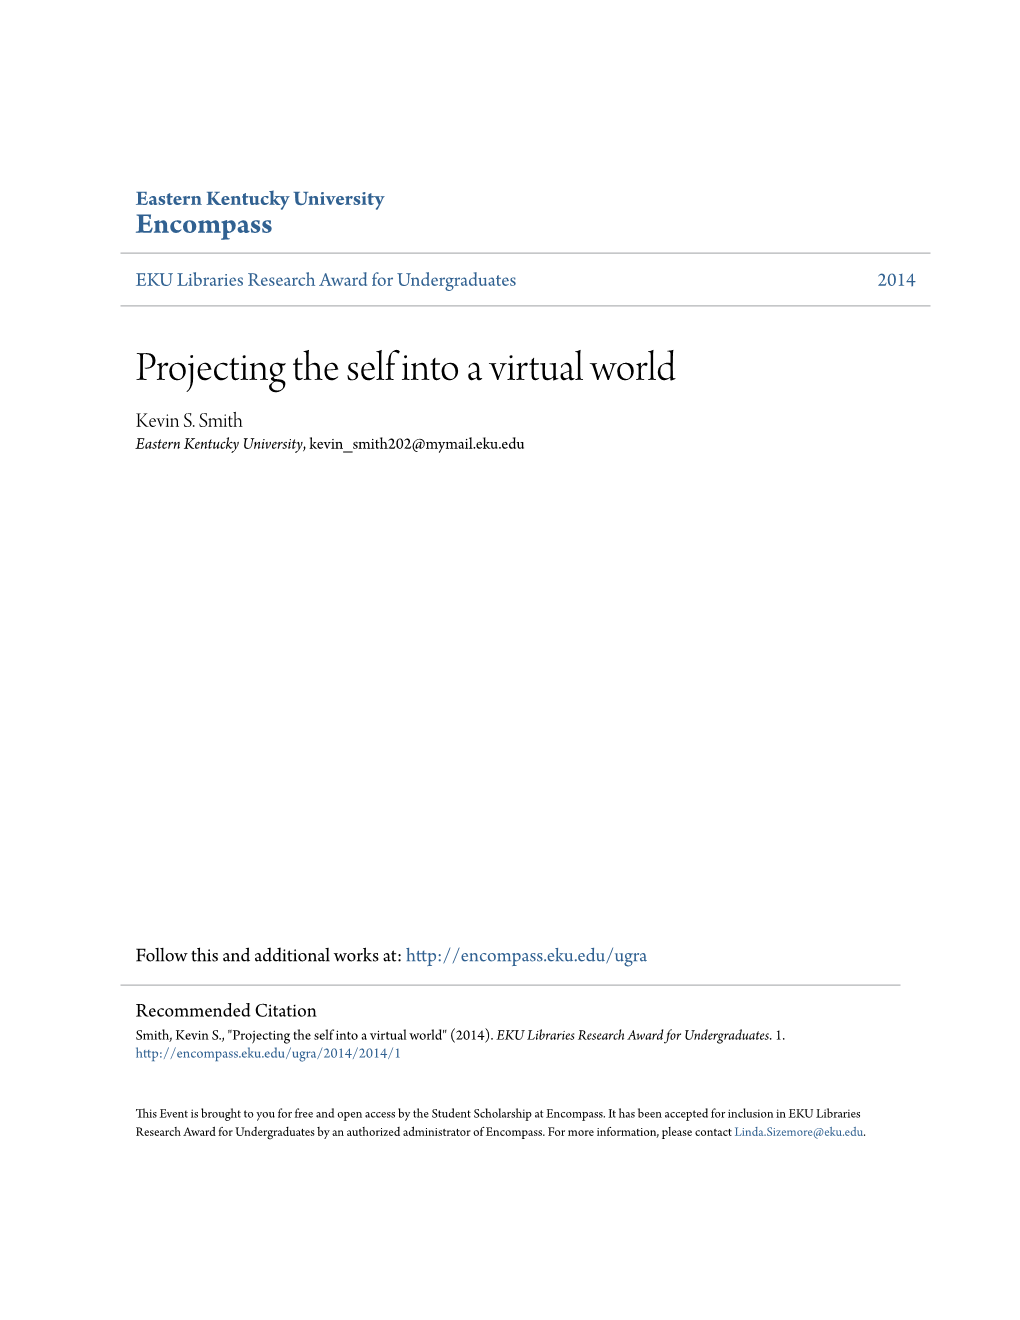 Projecting the Self Into a Virtual World Kevin S